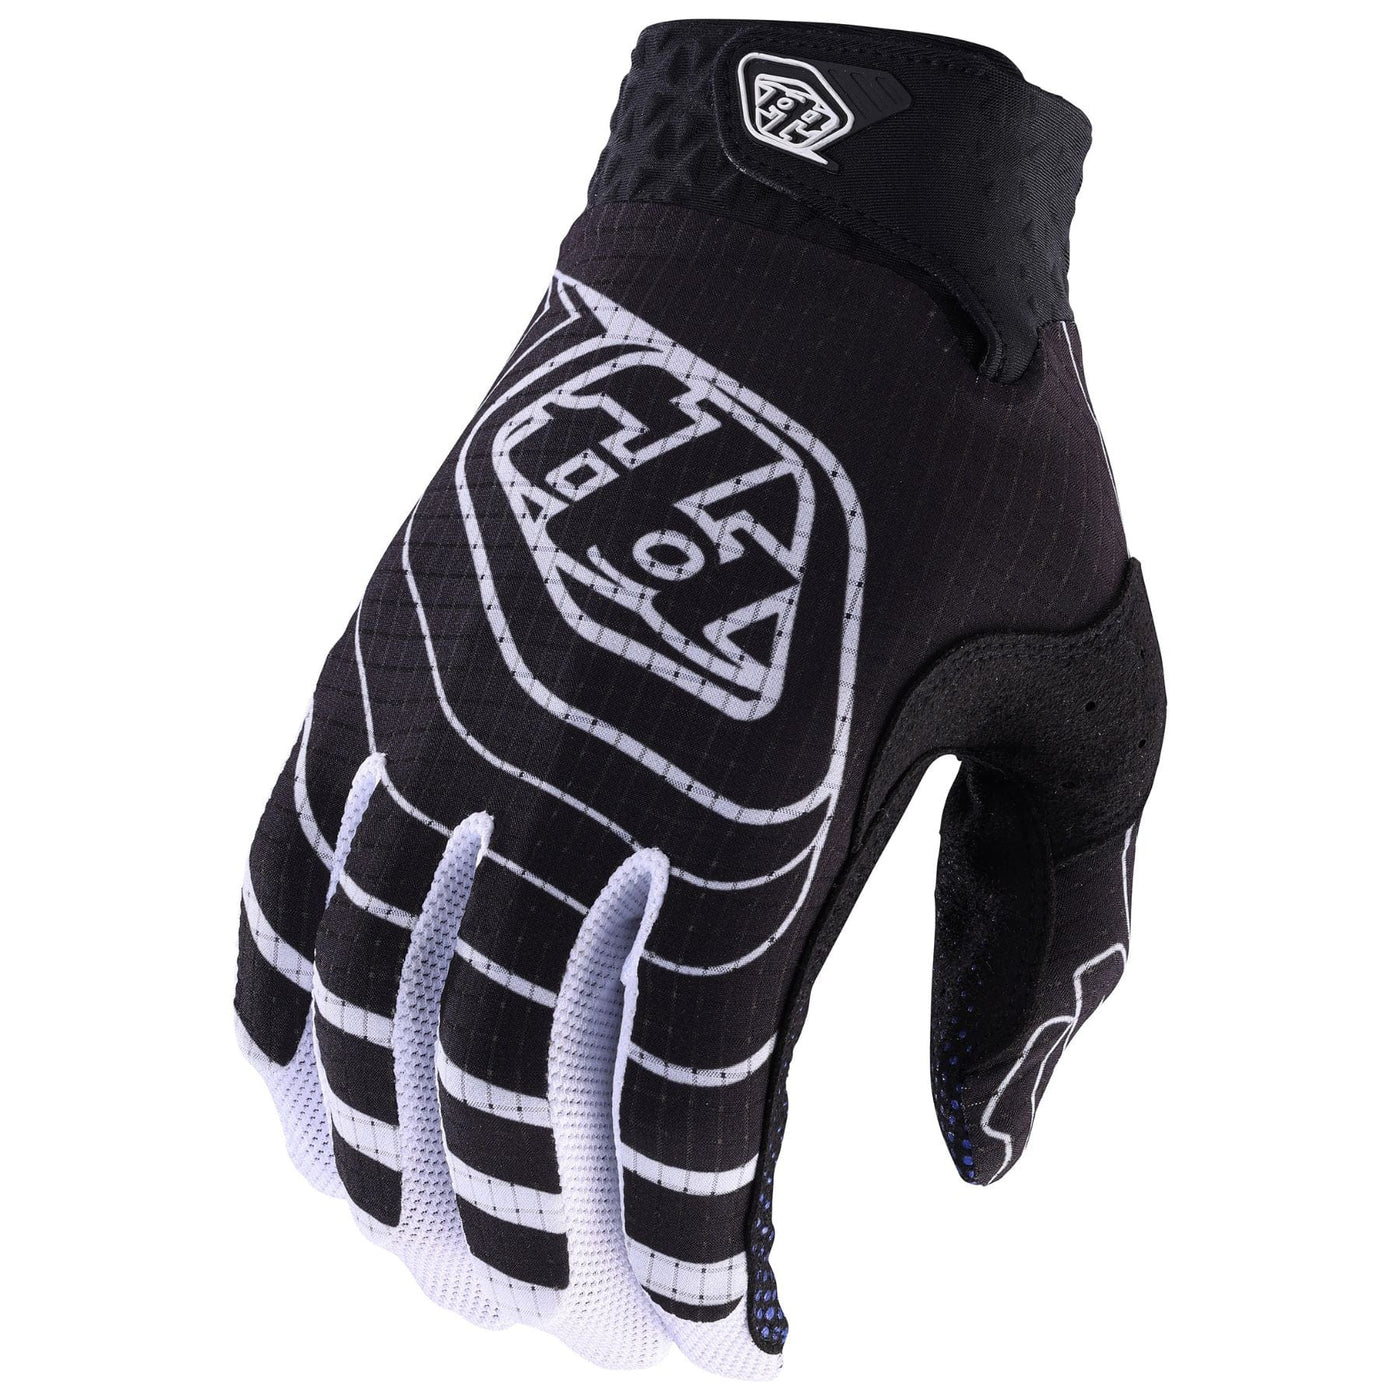 Troy Lee Designs Gloves Youth AIR Richter - Black/Blue 8Lines Shop - Fast Shipping